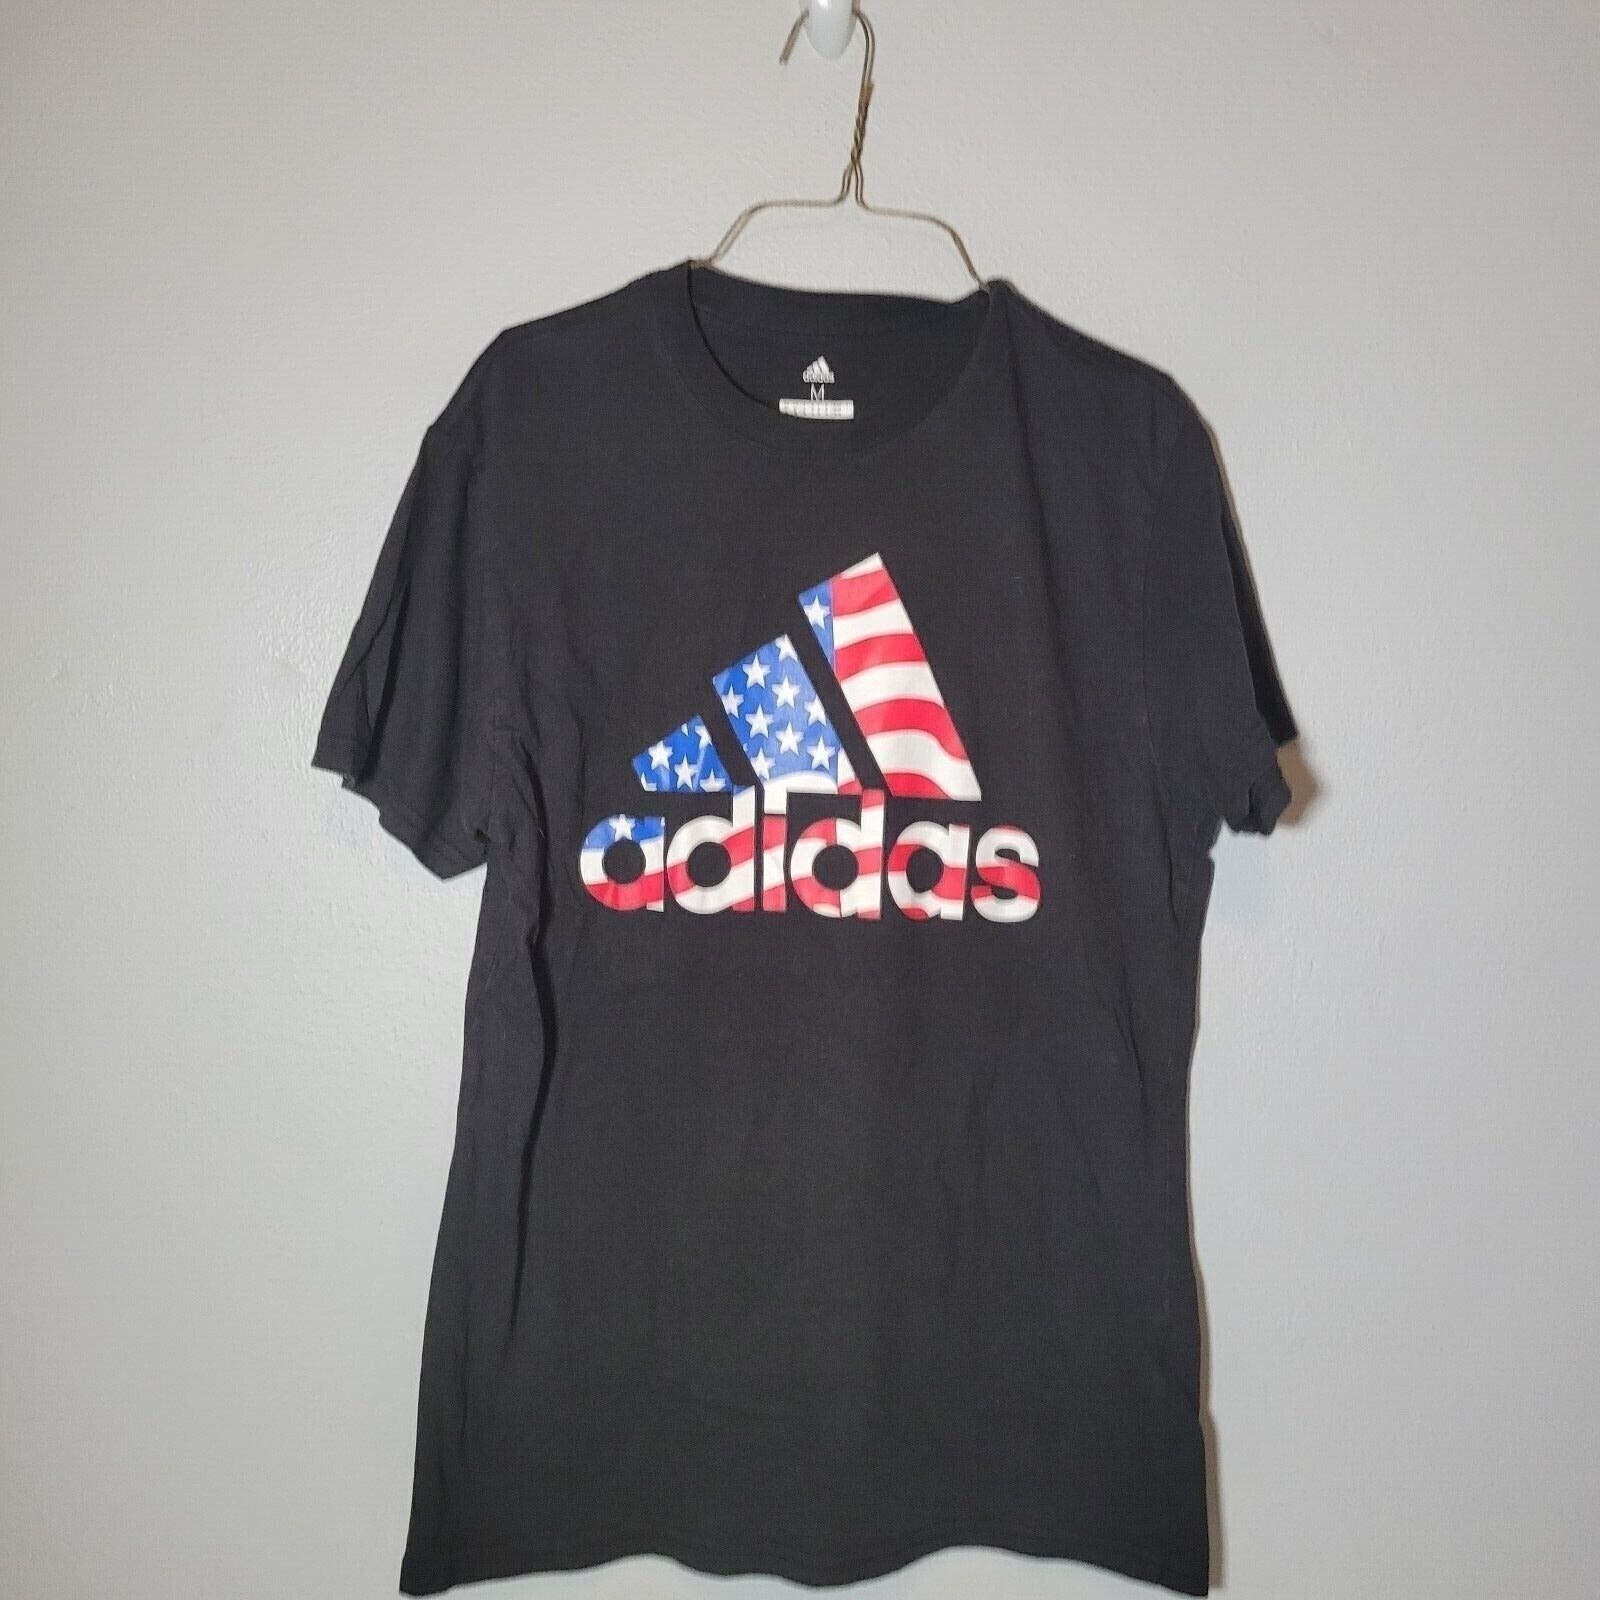 Primary image for Adidas Shirt Mens Medium American Red White Blue Stars Spell Out Golf Casual